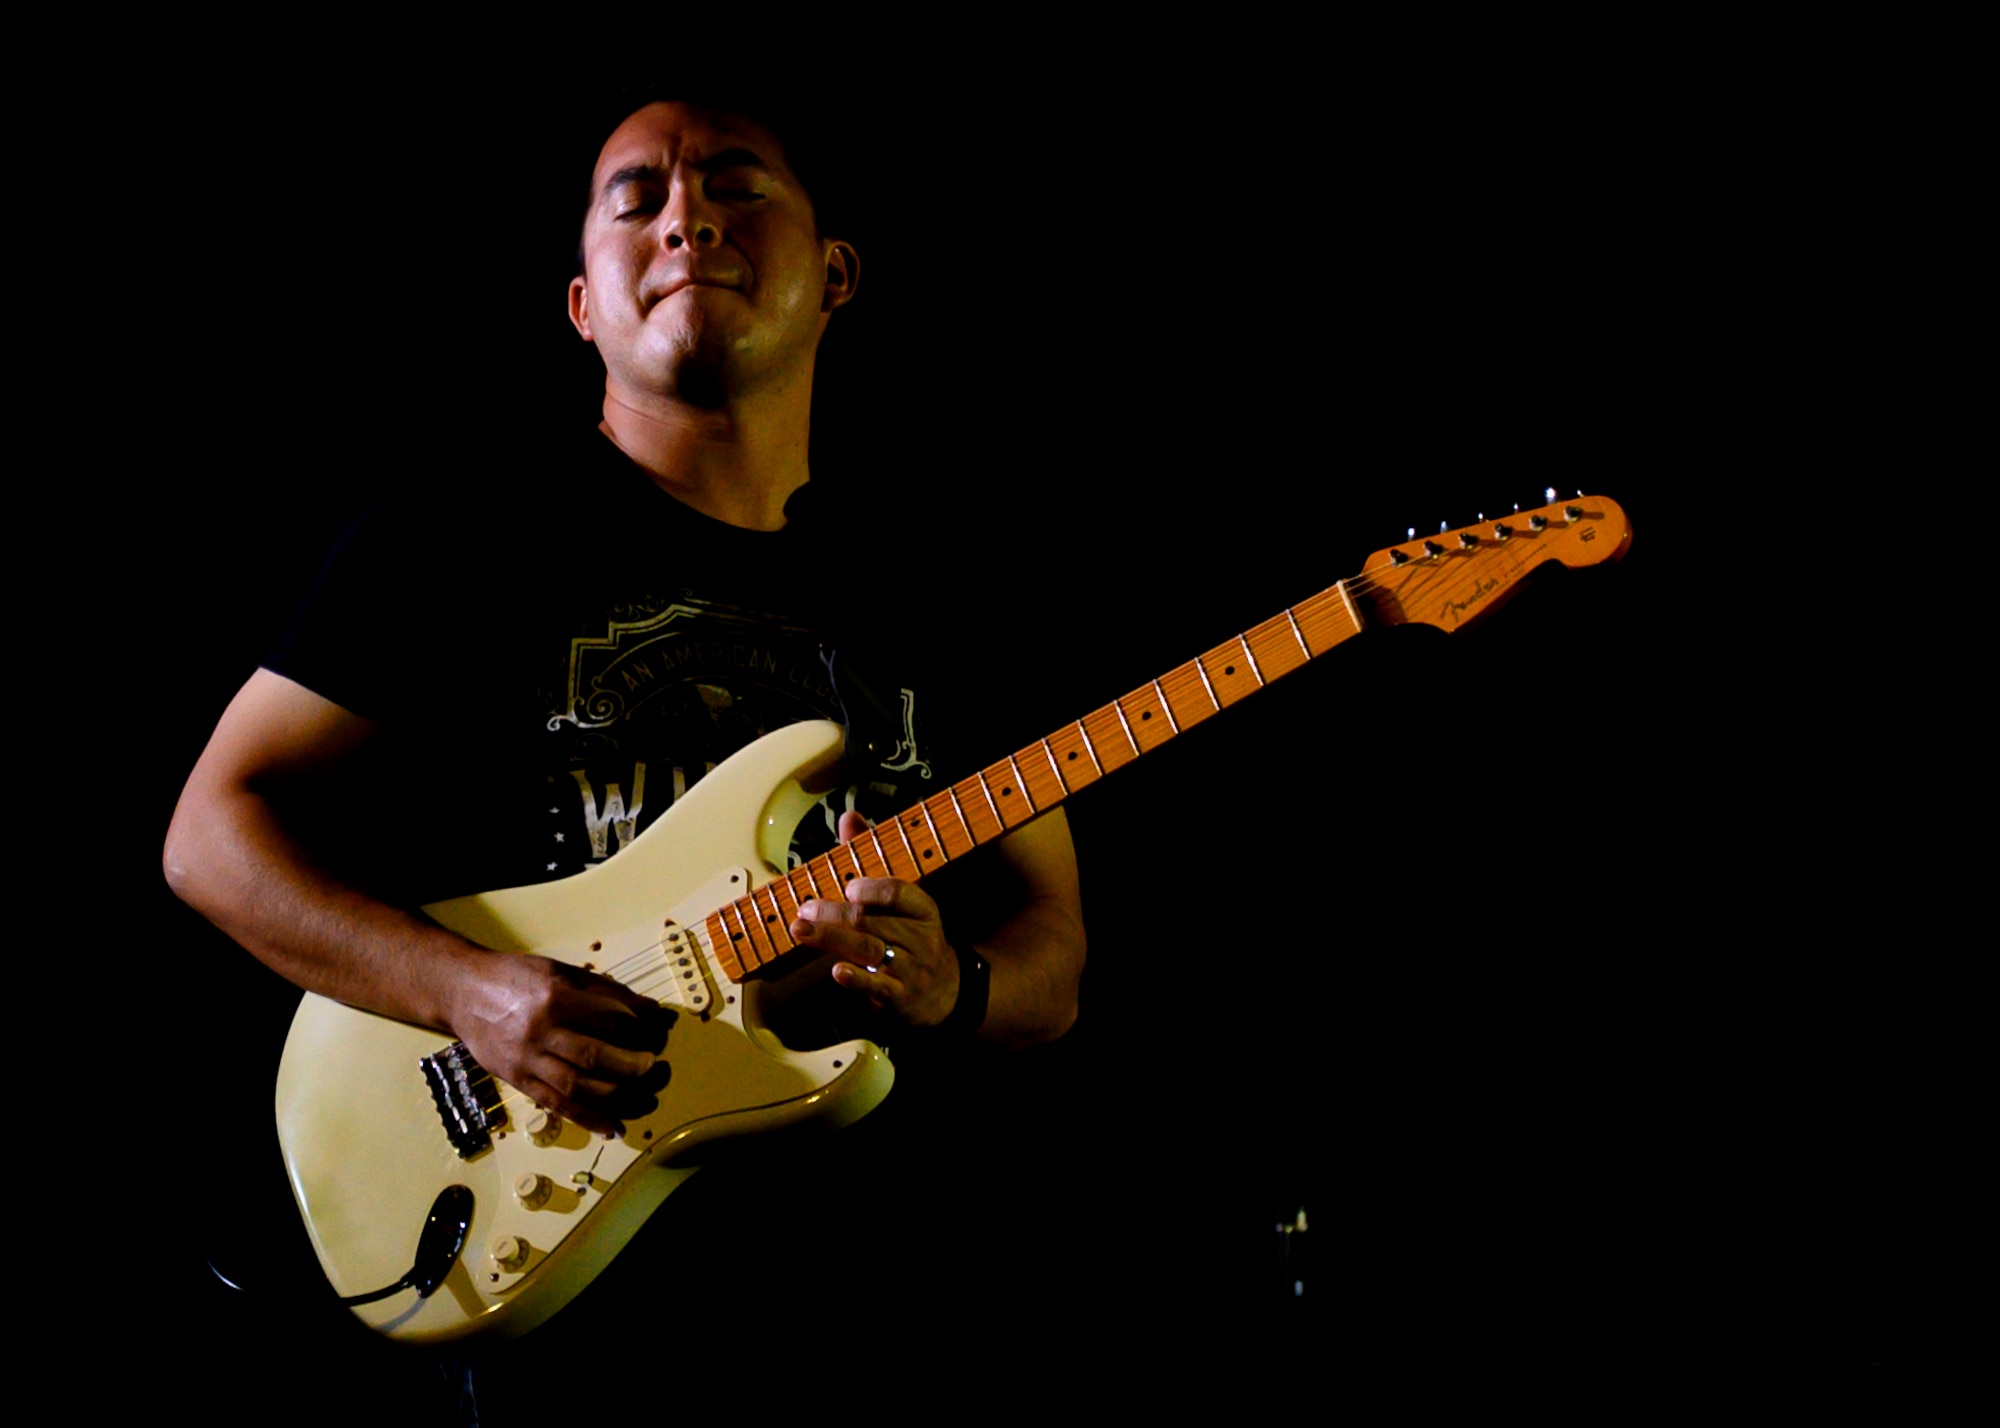 U.S. Air Force Airman 1st Class Christopher Arellano, U.S. Air Forces Central Band guitarist, performs during a concert at Prince Sultan Air Base, Kingdom of Saudi Arabia, Oct. 15, 2021. The 378th Air Expeditionary Wing hosted two nights of performances in recognition and celebration of the base’s accomplishments throughout the past summer. (U.S. Air Force photo by Senior Airman Samuel Earick)